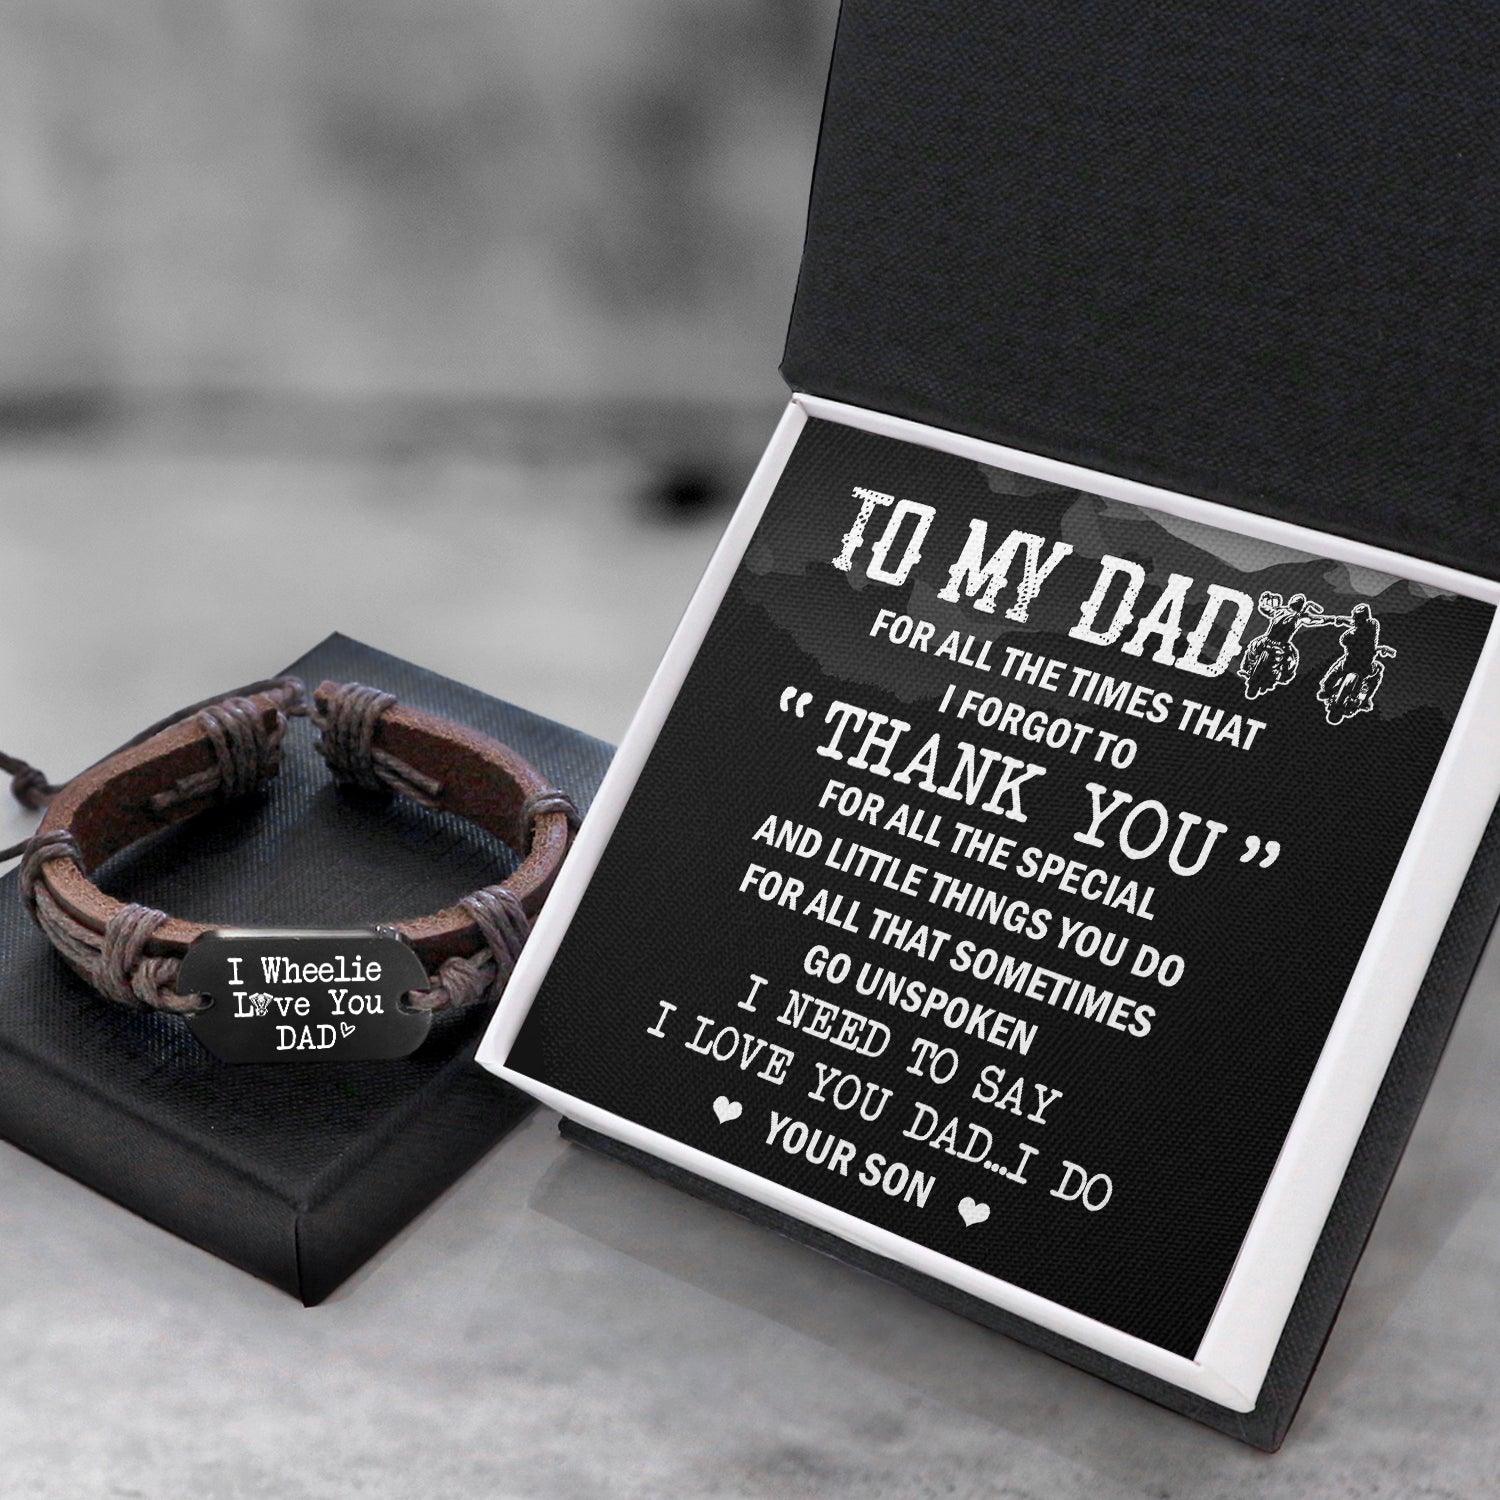 Leather Cord Bracelet - Biker - To My Dad - From Son - I Love You Dad...i Do - Augbr18002 - Gifts Holder